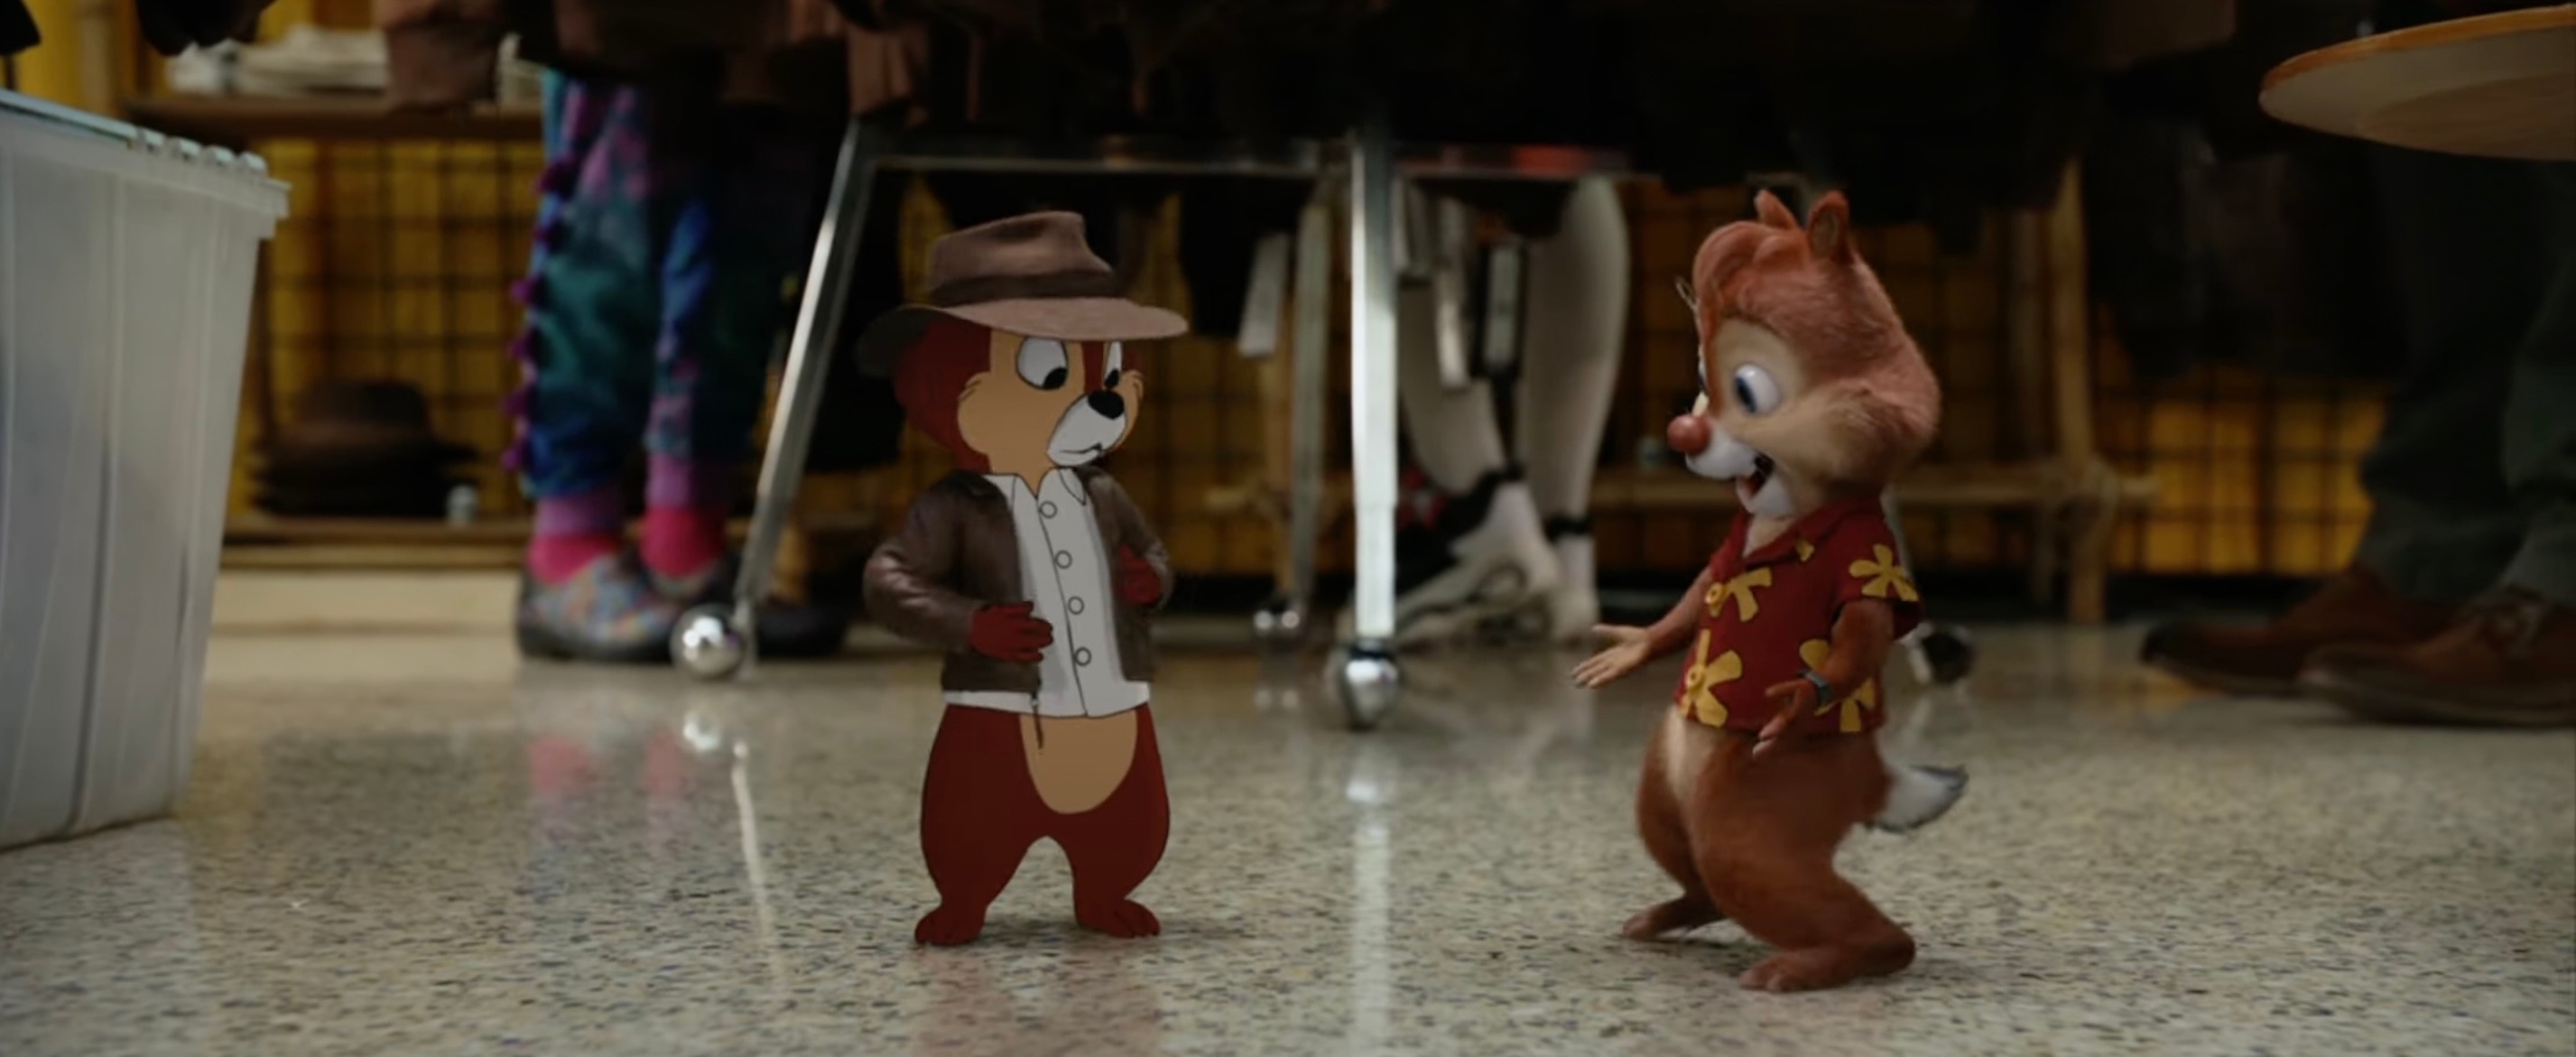 Chip 'n Dale: Rescue Rangers Disney+ trailer: Watch now | SYFY WIRE